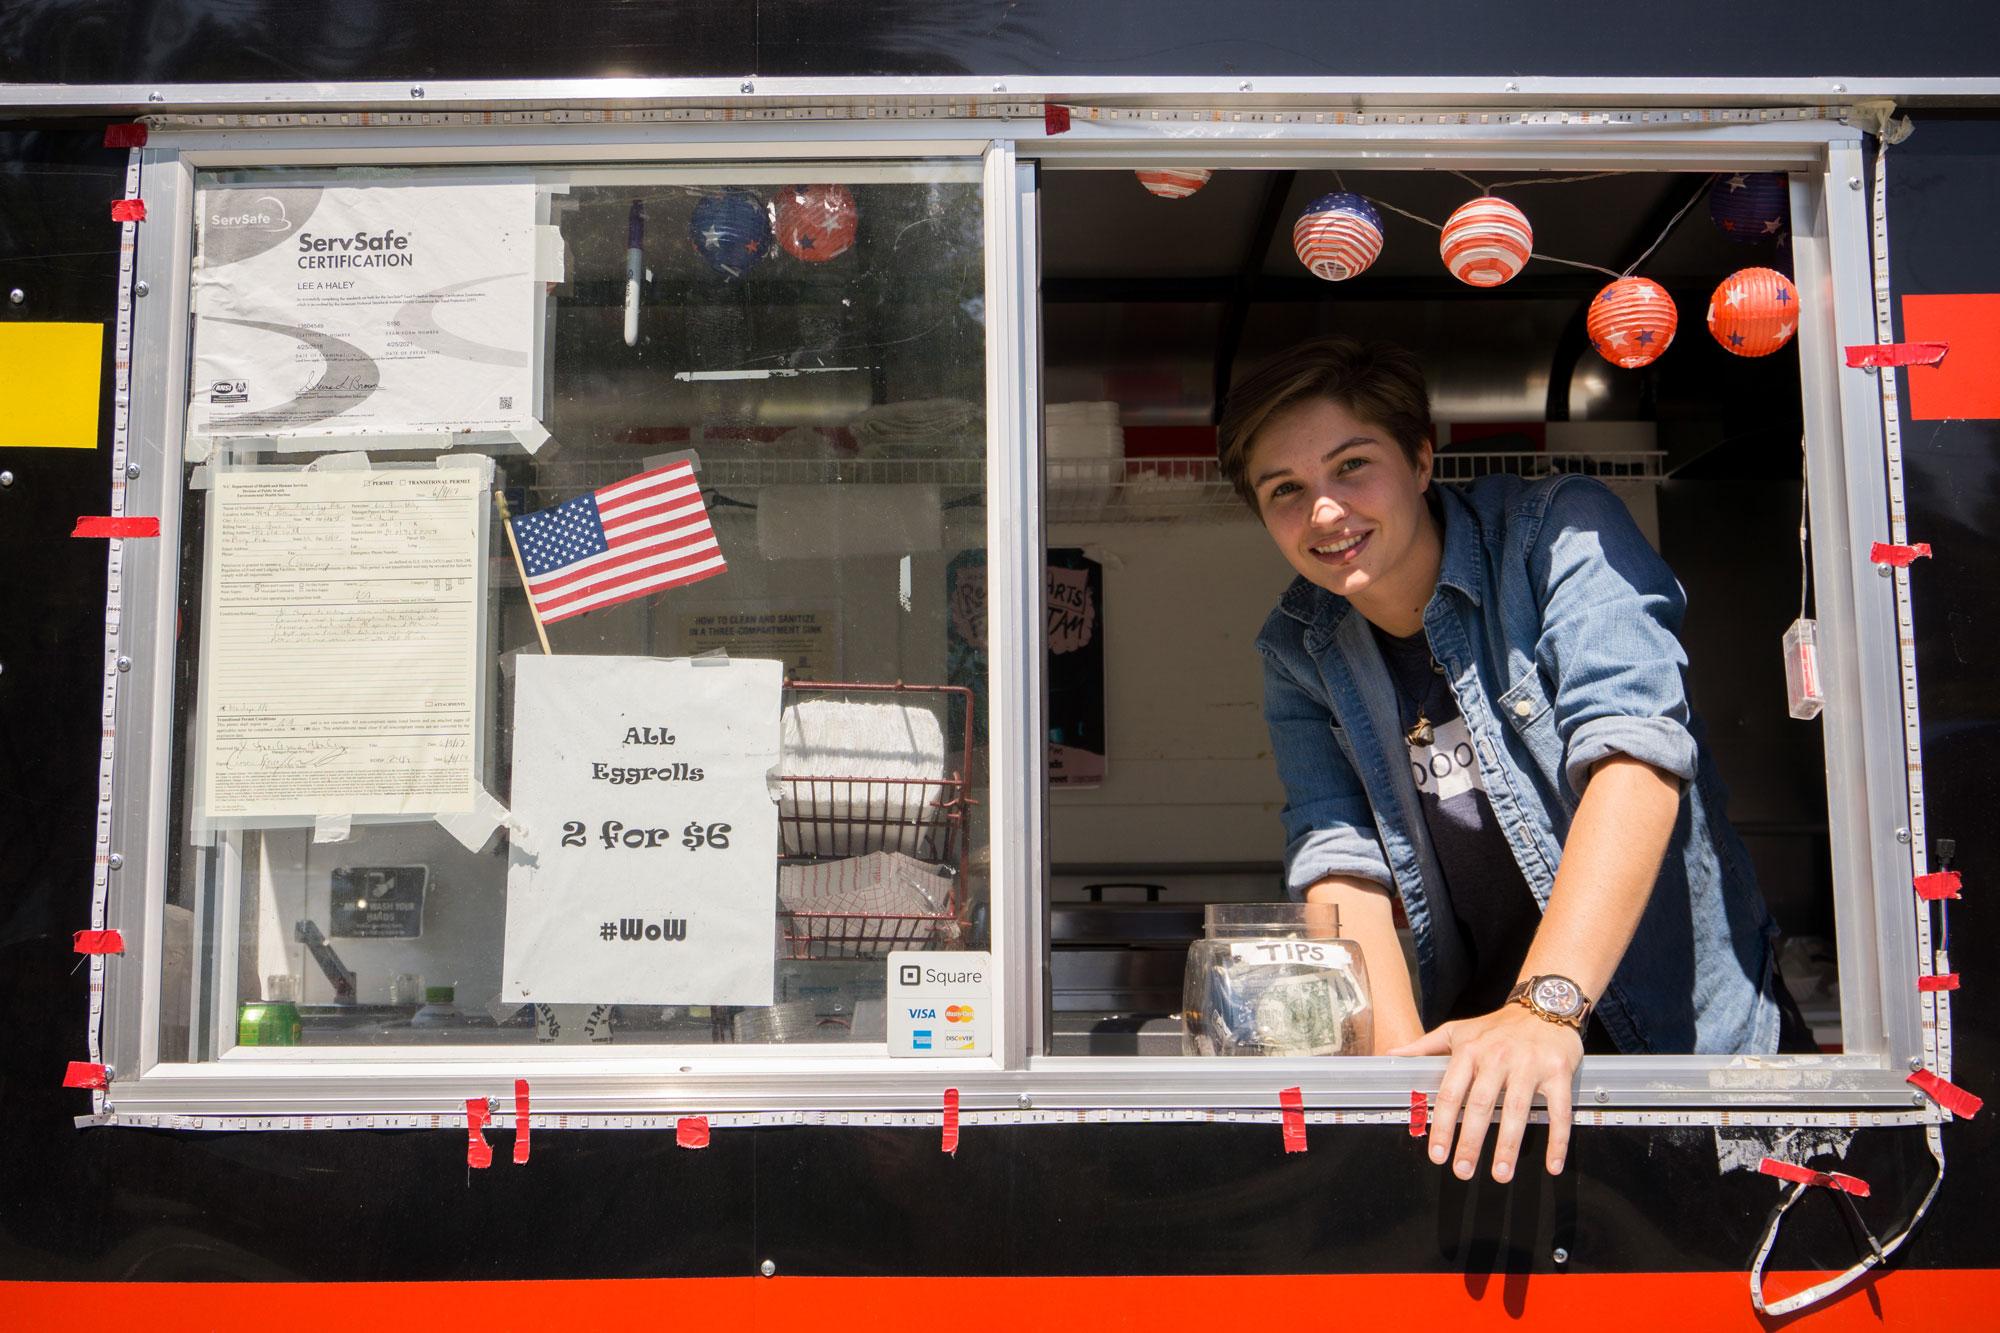 Boone resident Abbe Miller serves fresh, hot egg rolls from her food truck at the Reckless Art Fair.  The event brought together artists and entrepreneurs from Boone and beyond. 